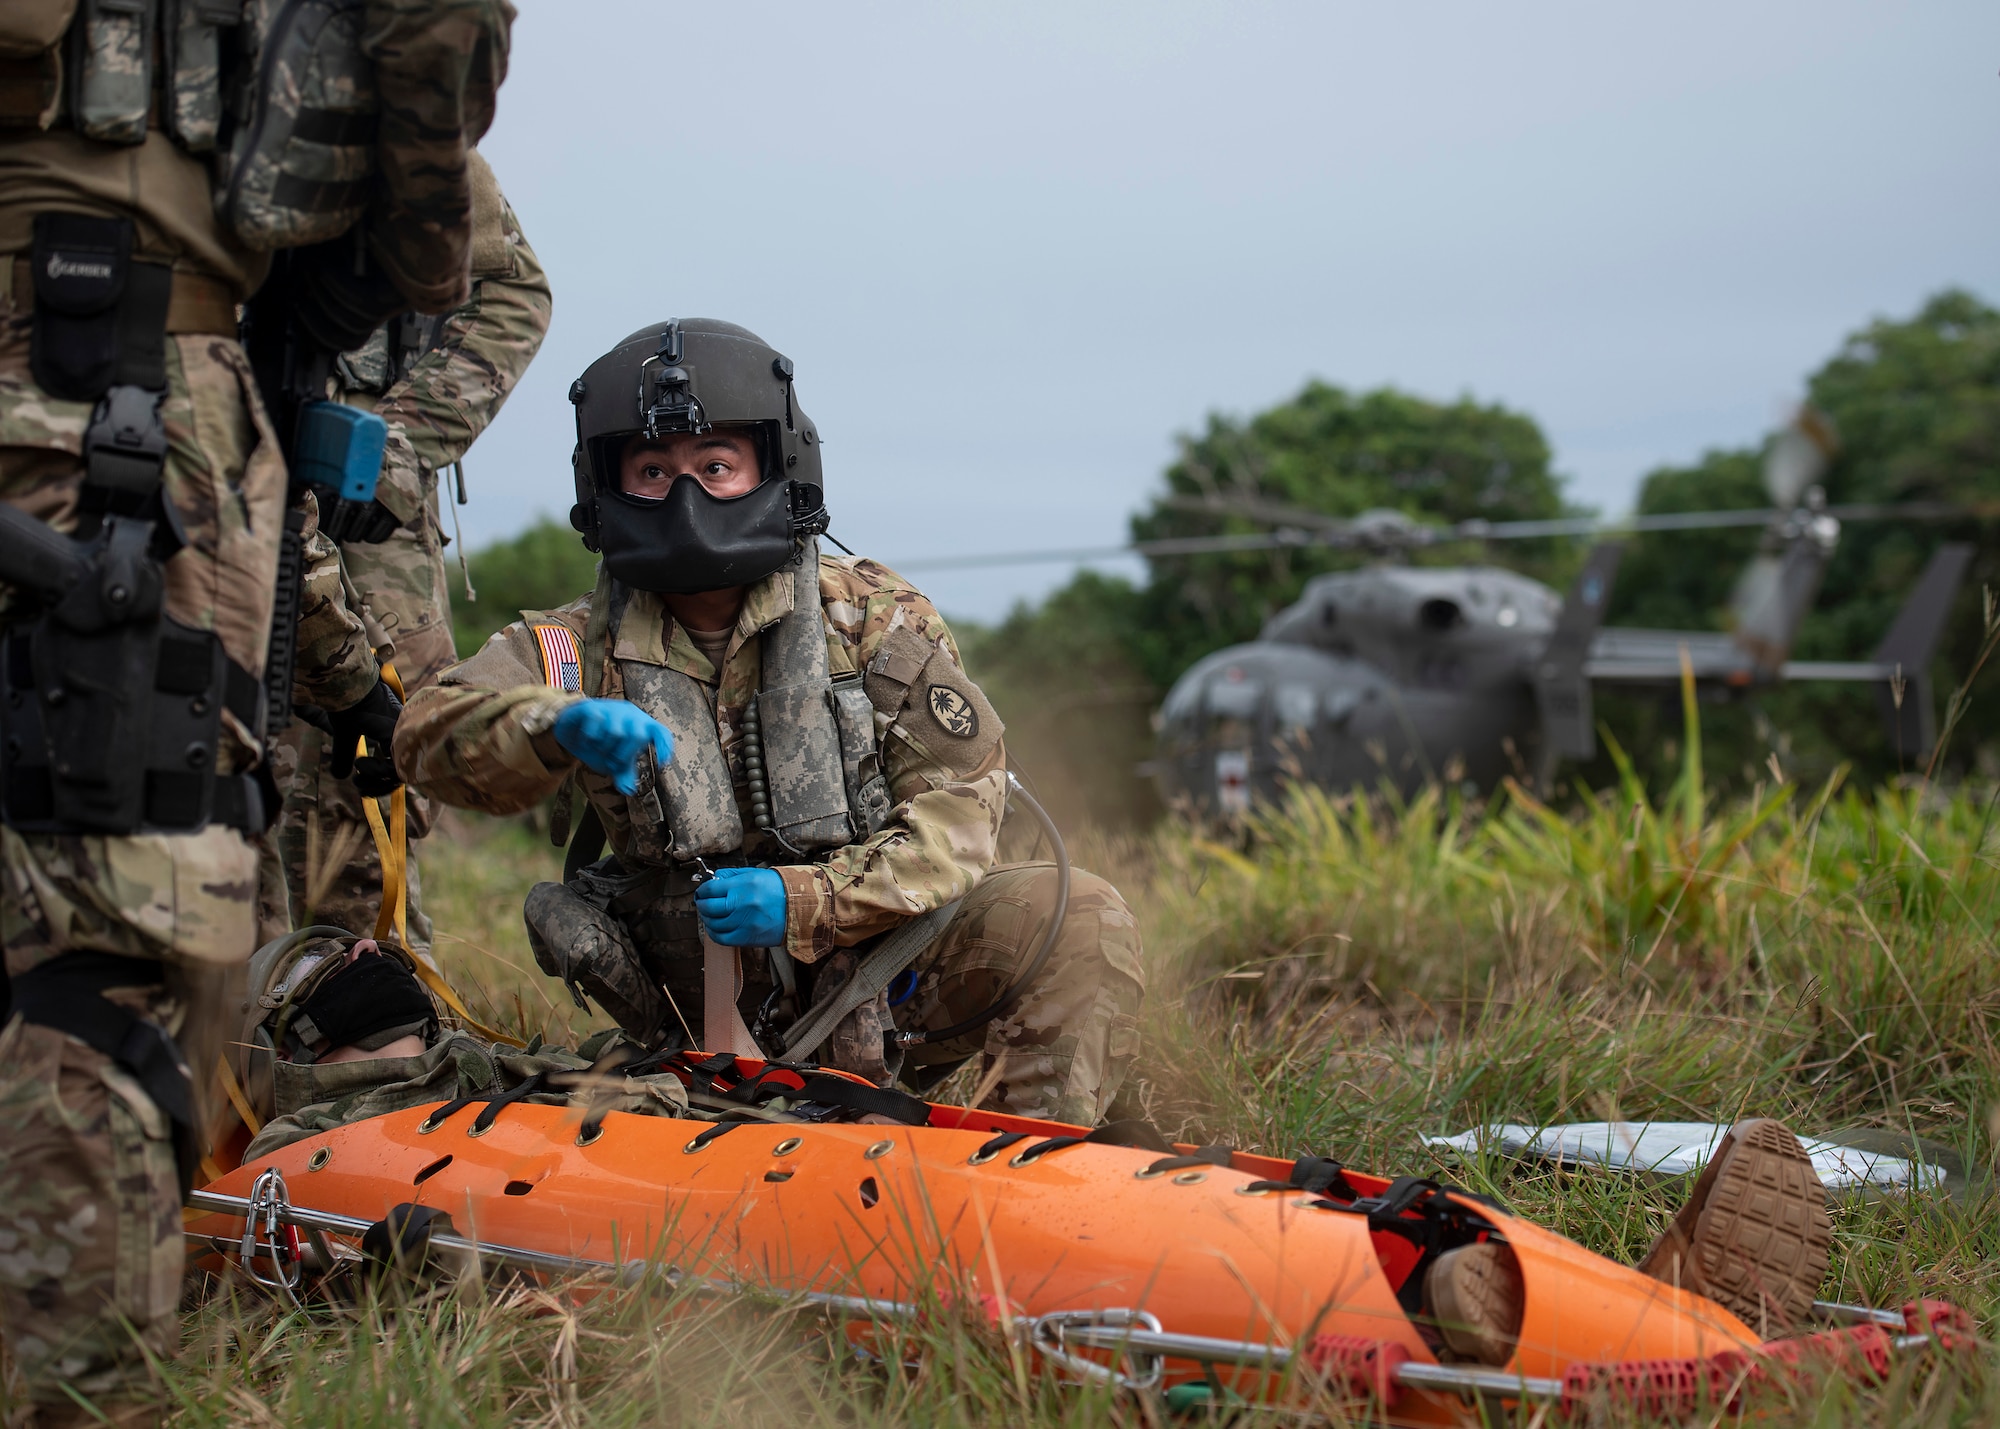 Sgt. Keoni Wong, Detatchment 2, Delta Company, 1st-224th Aviation (MEDEVAC), Guam National Guard, flight medic, provided emergency airlift support for Exercise Dragon Shield at Northwest Field, Guam, January 13, 2021.